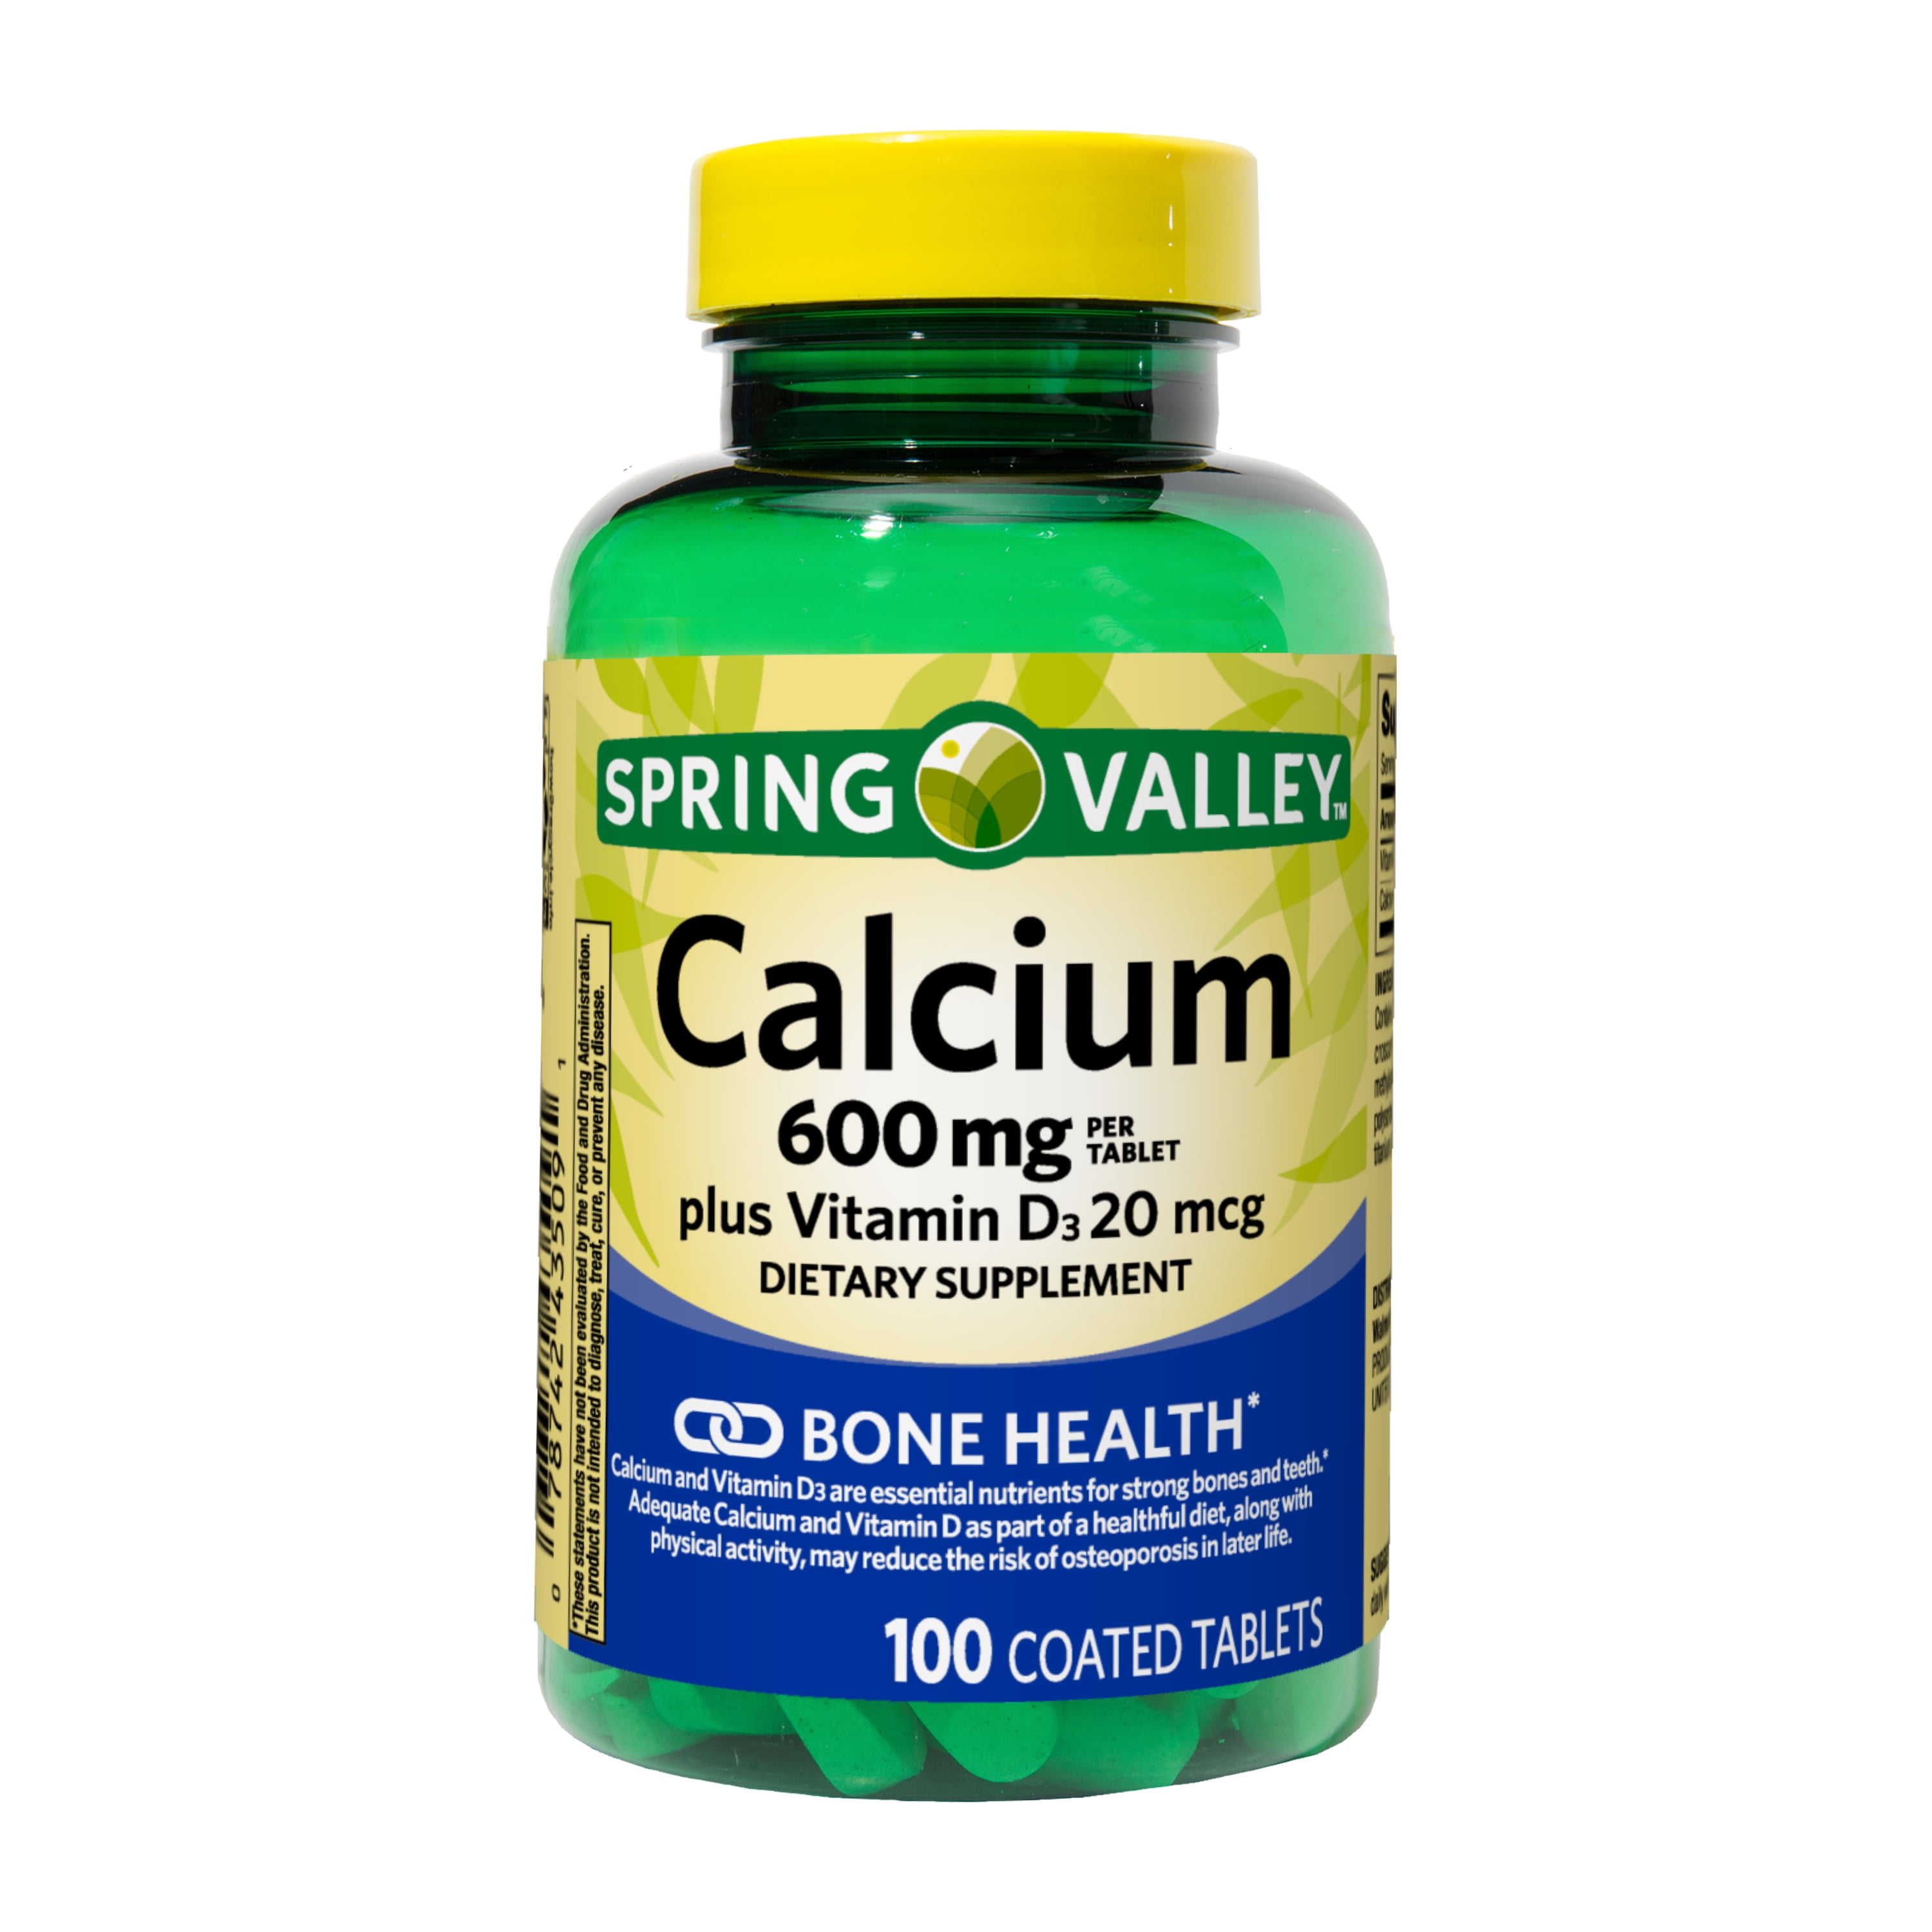 Spring Valley Calcium Plus Vitamin D Tablets Dietary Supplement, 600 mg, 100 Count